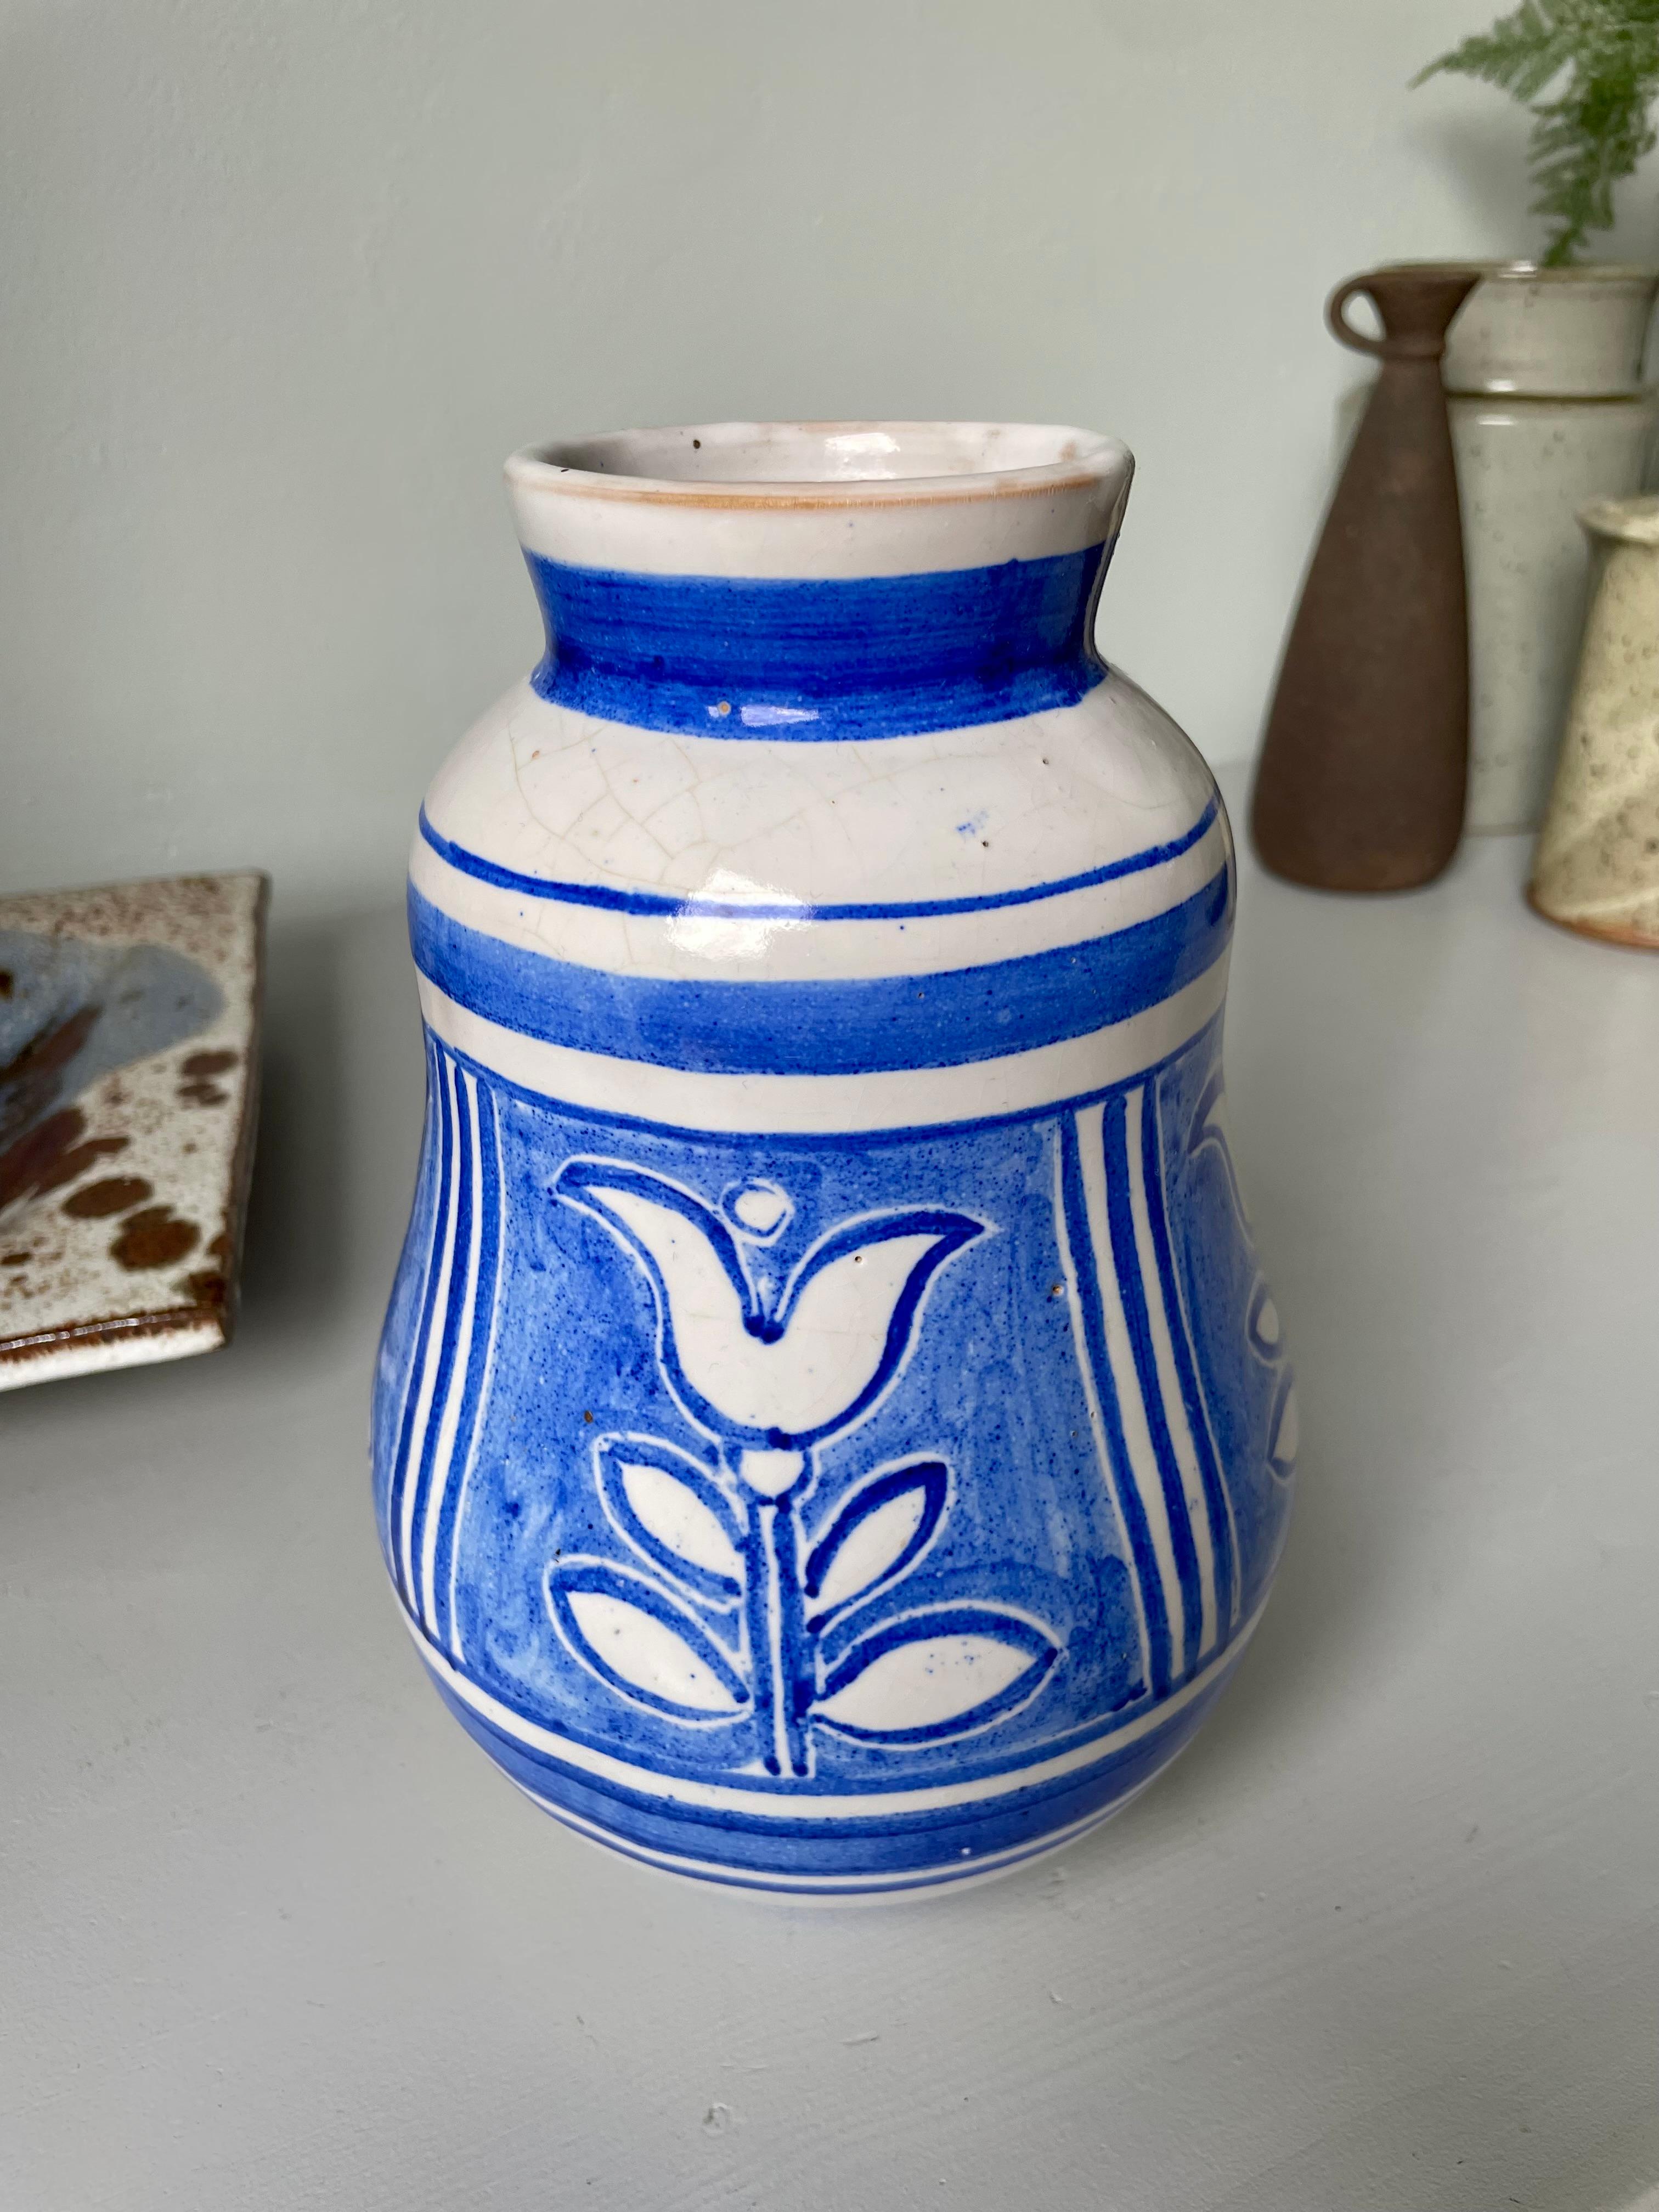 Nordic White Hand-Decorated Blue Floral Ceramic Vase, 1950s For Sale 2